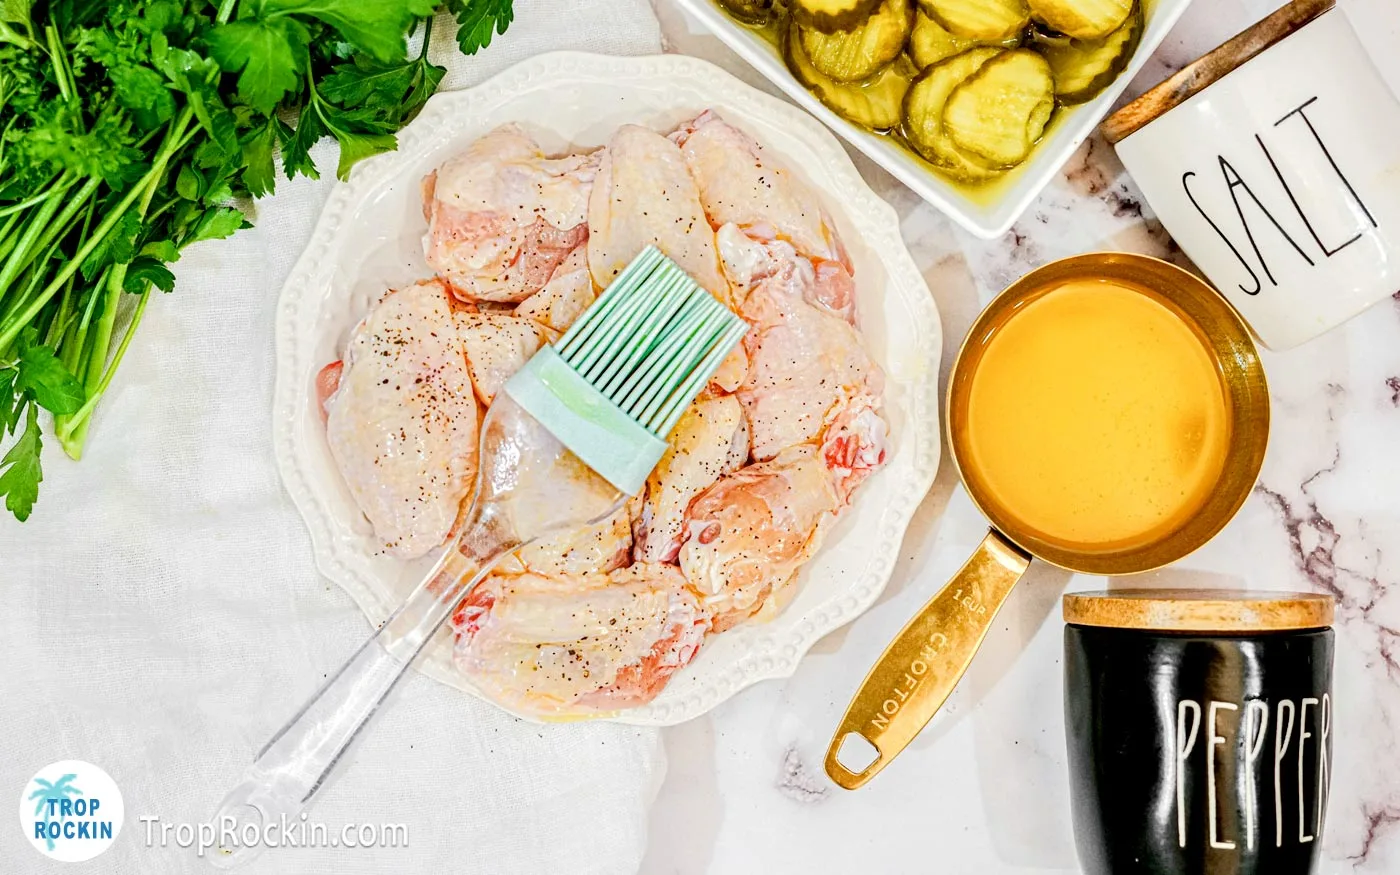 Bowl of raw chicken wings with a pastry brush on to. Small pot of melted butter and bowl of pickle slices next to the chicken wings.